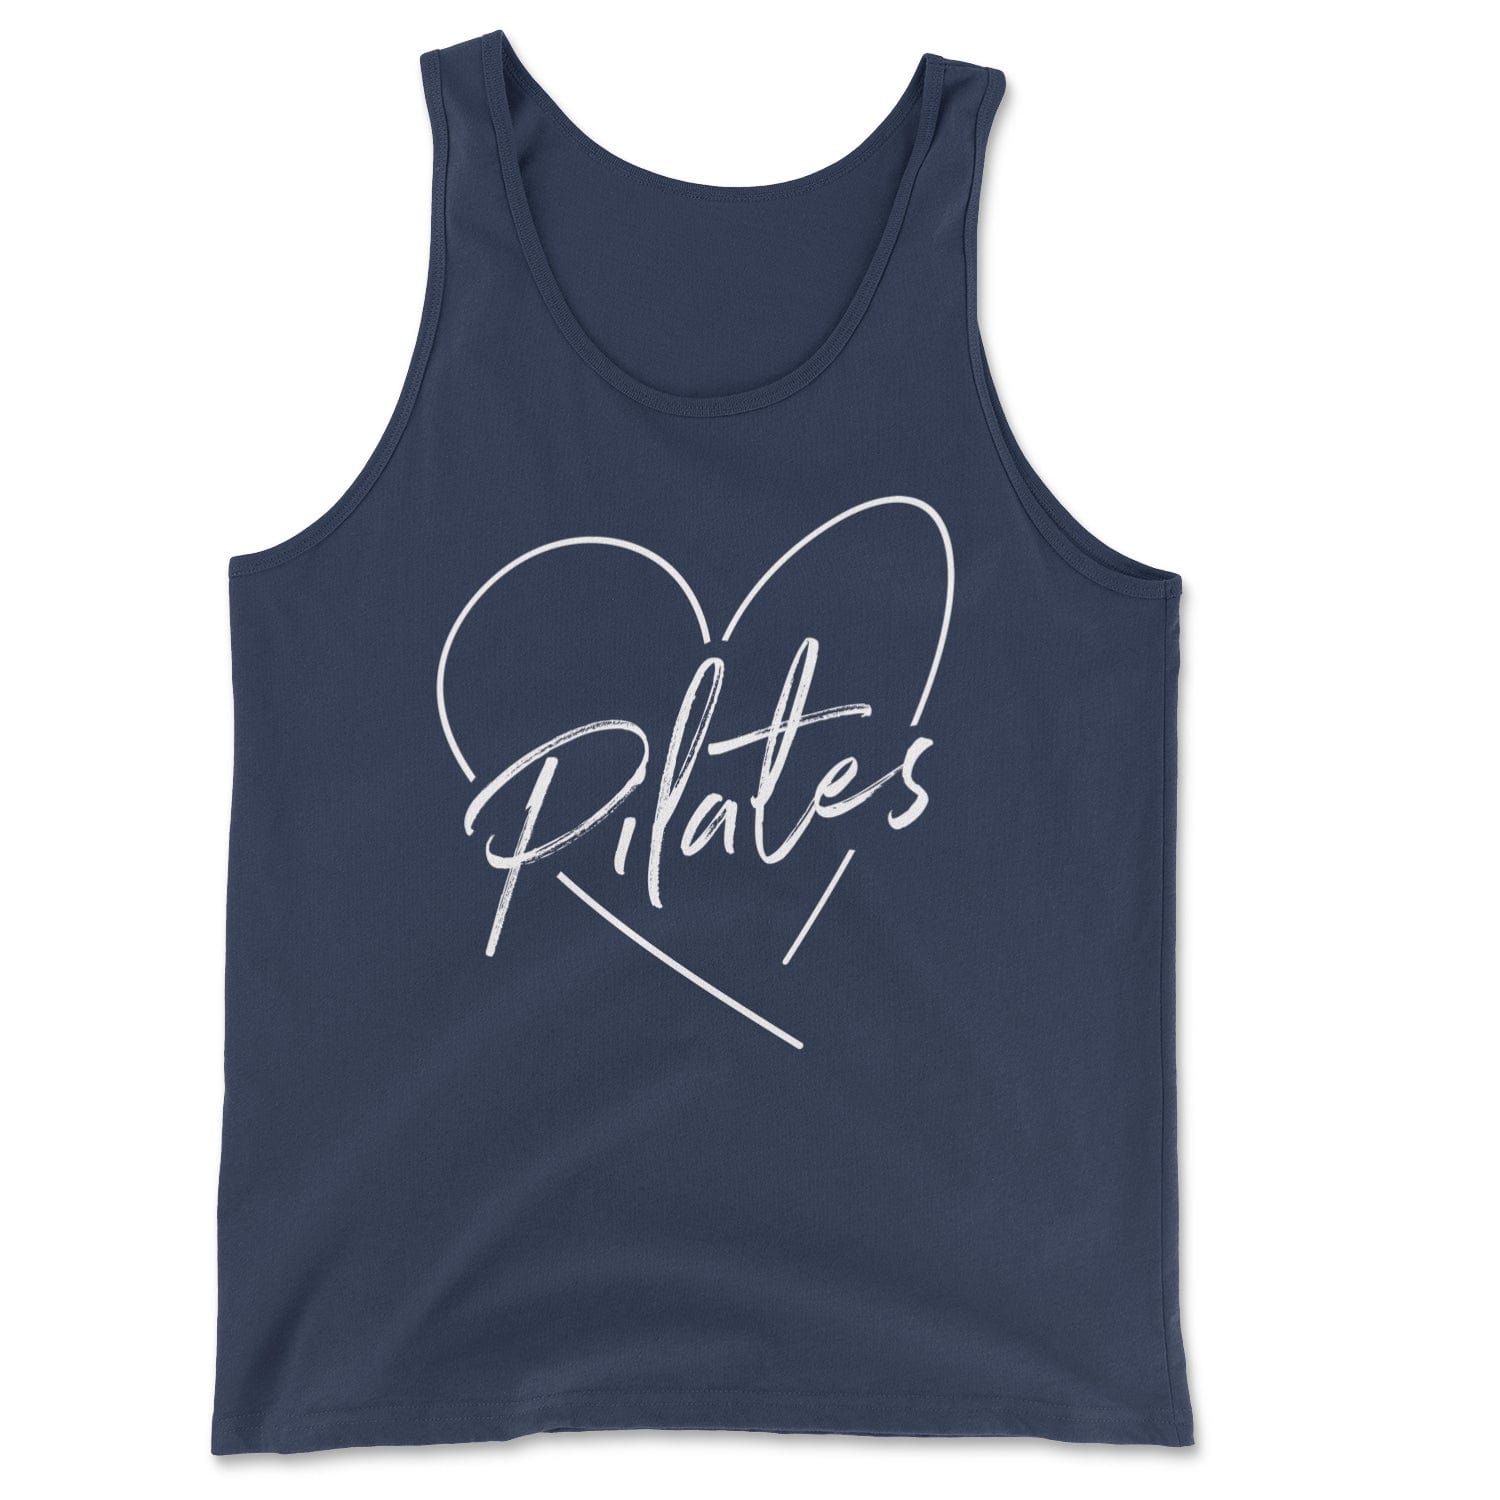 Pilates Lover - Classic Tank Skyba Print Material